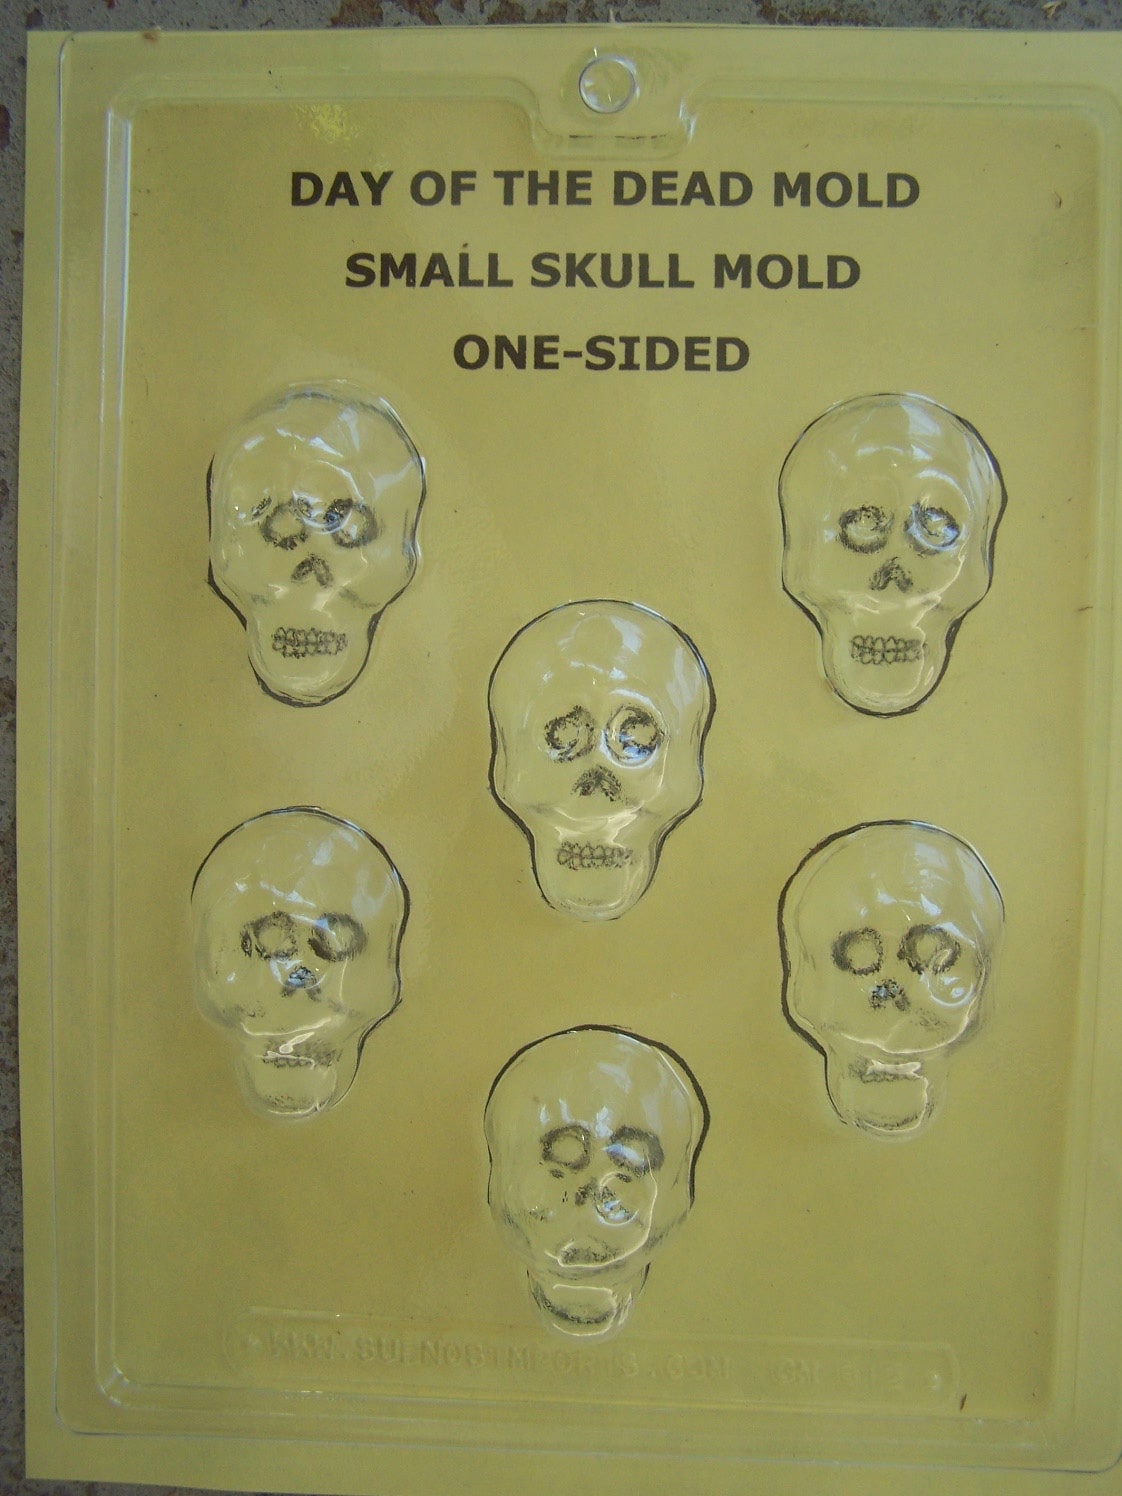 Small Sugar Skull Molds/Candy Molds - Day of the Dead